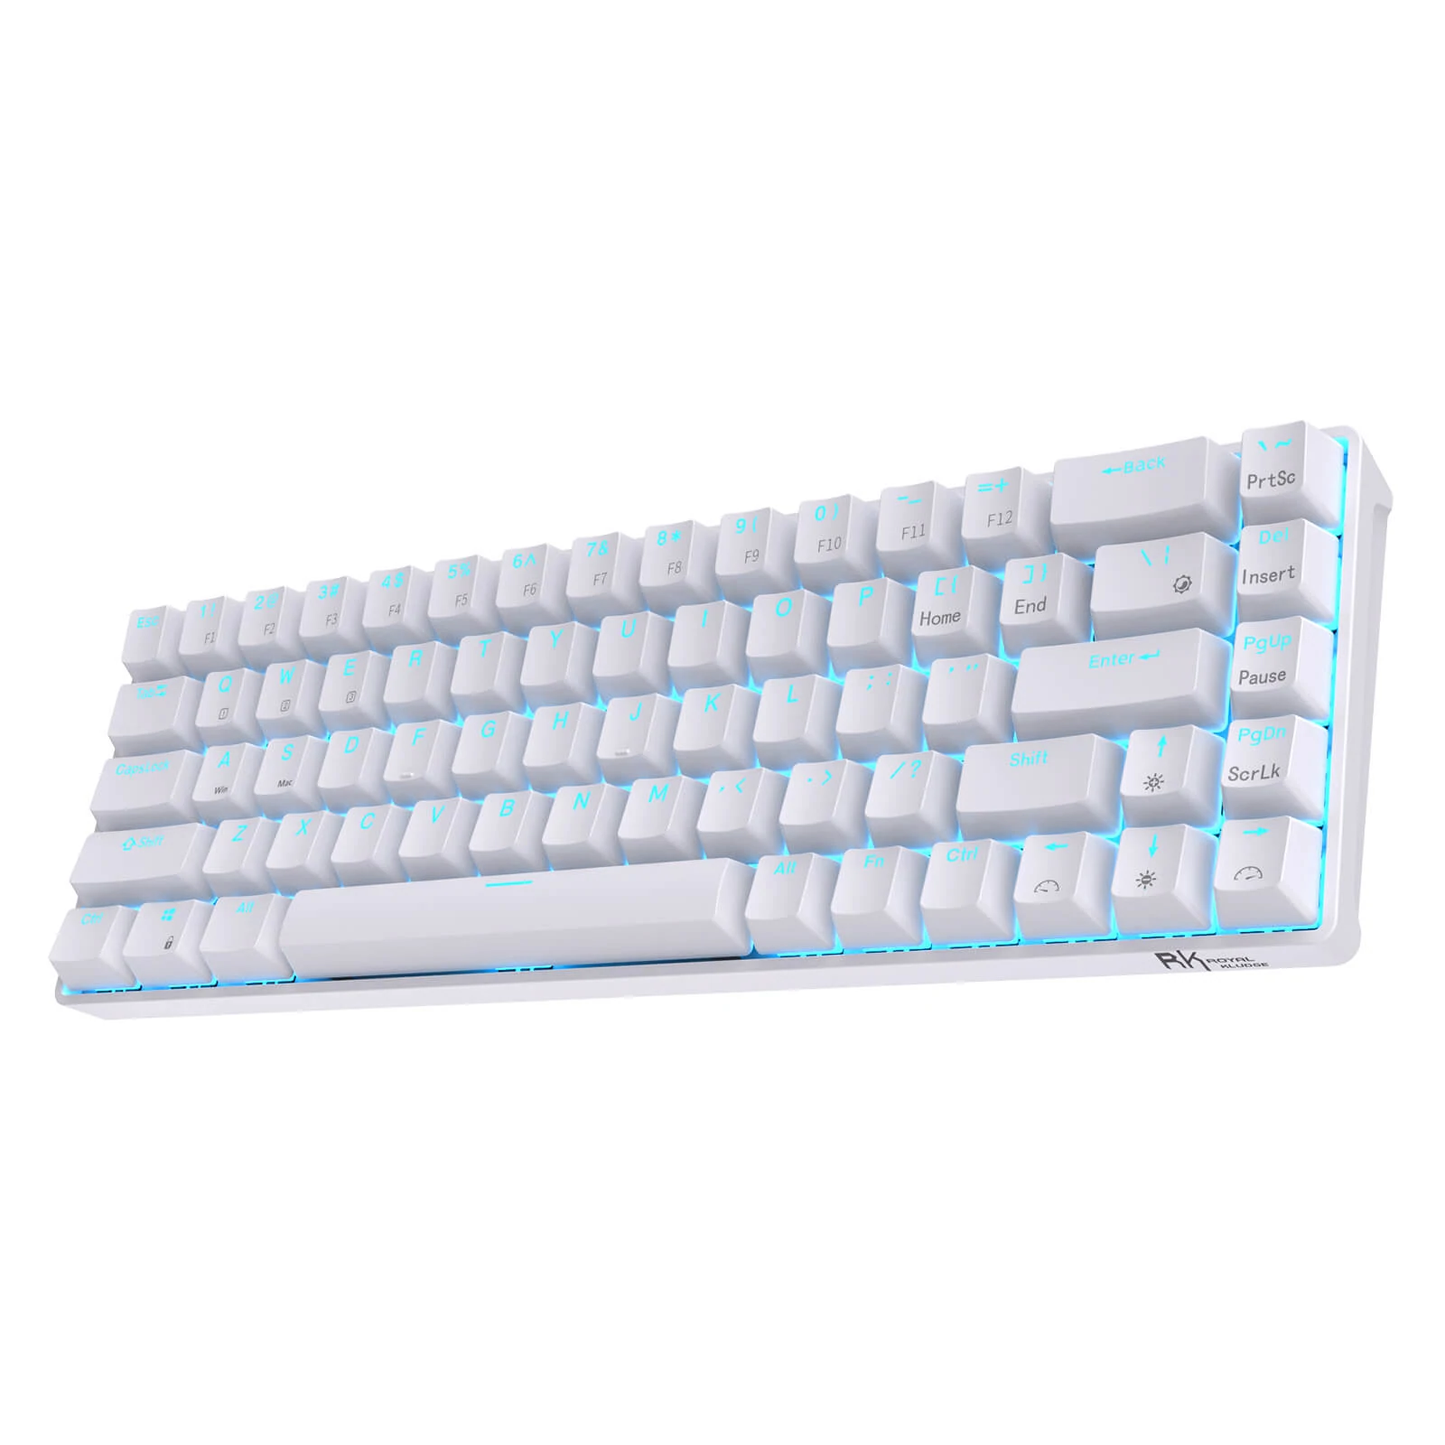 Royal Kludge RK RKG68 68 Keys Mechanical Gaming Keyboard 2.4G Wireless Hot Swappable TKL with Bluetooth 5.0 (White, Black) (Blue Clicky, Red Linear, Brown Tactile Switch)